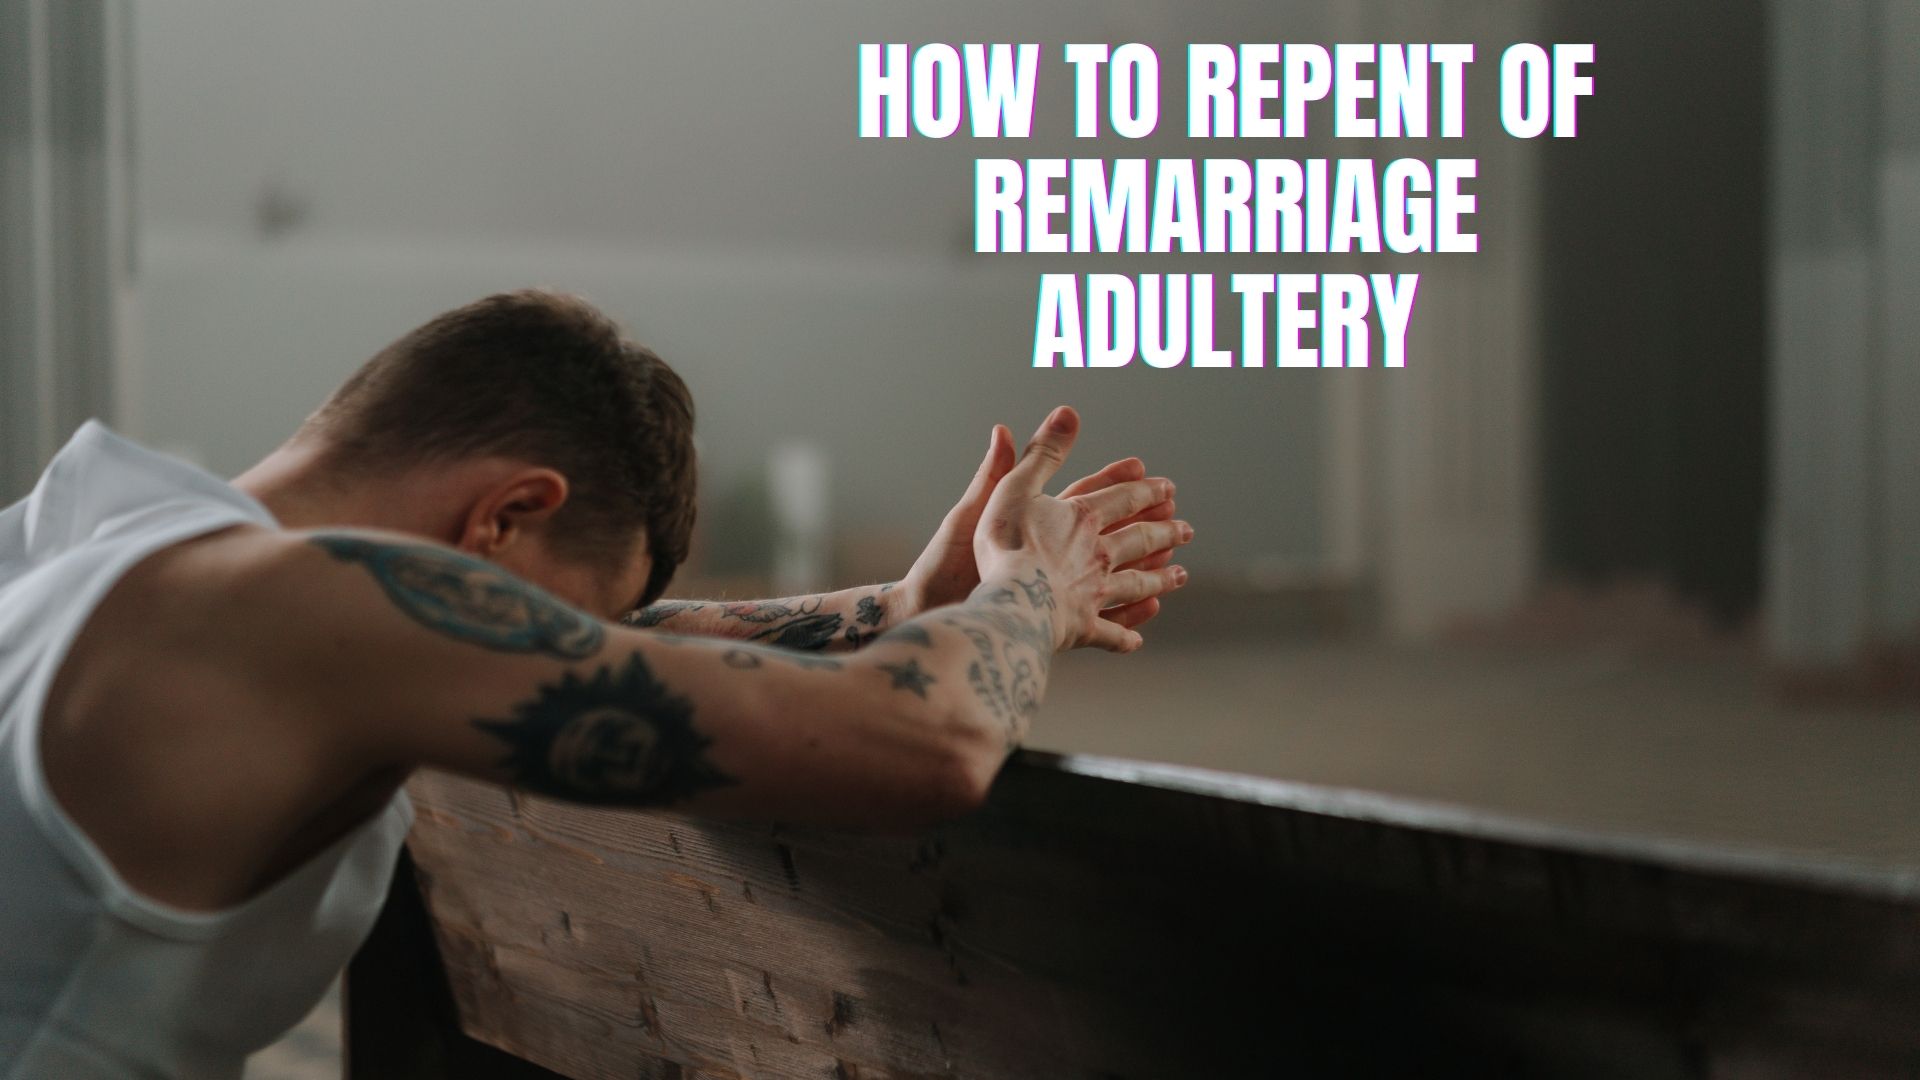 How To Repent Of Remarriage Adultery